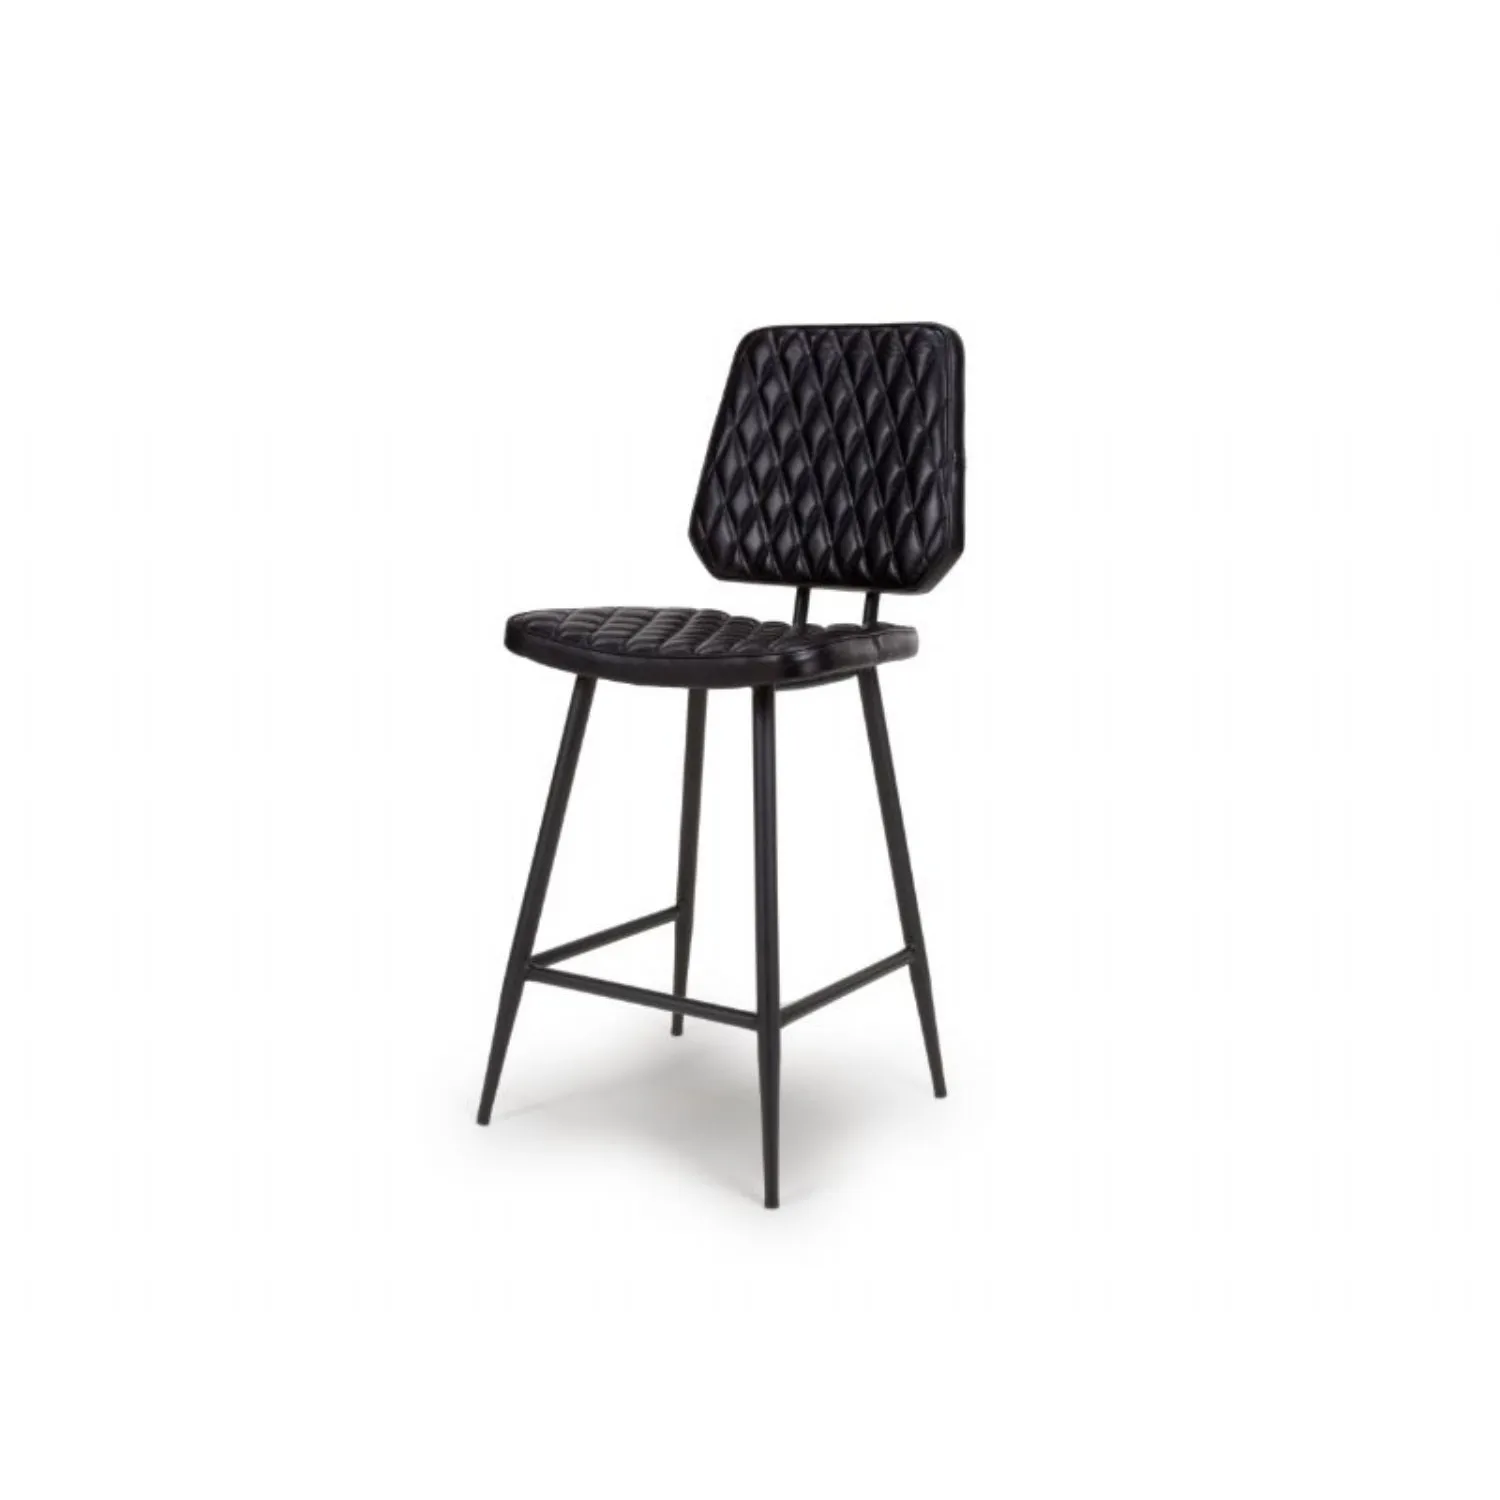 Austin Counter Chair Black (sold in 2s)